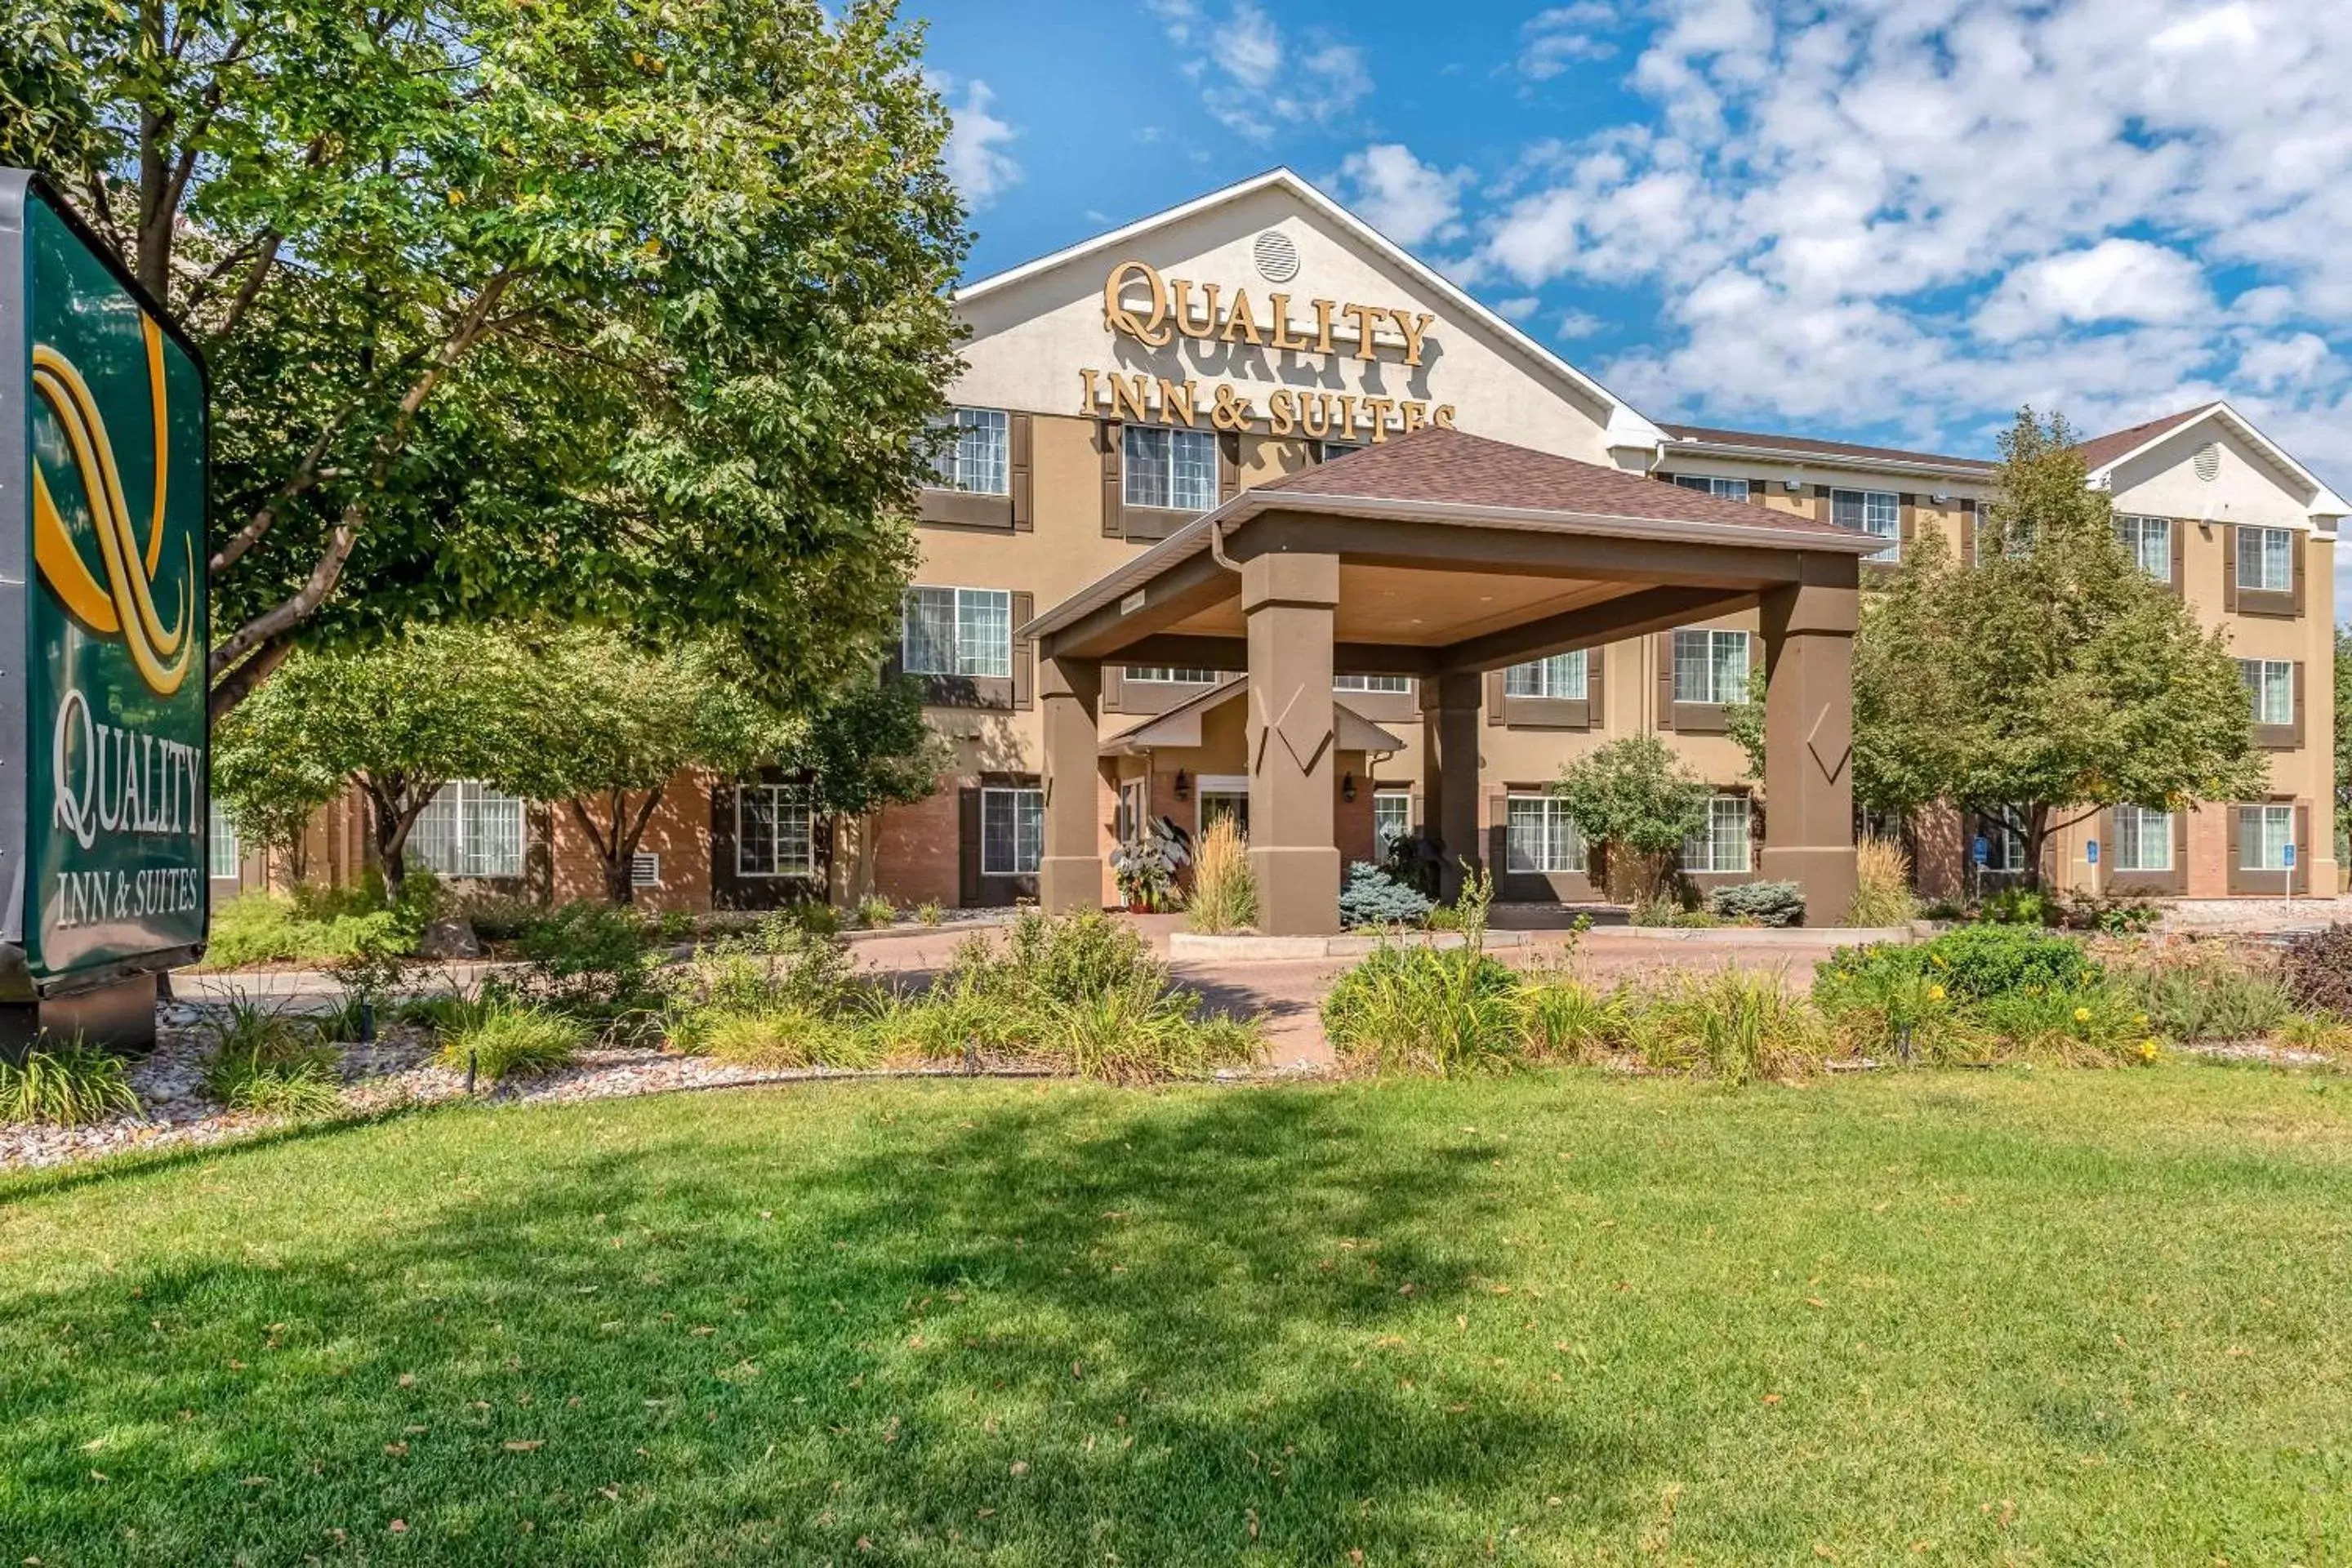 Property Building in Quality Inn & Suites University Fort Collins